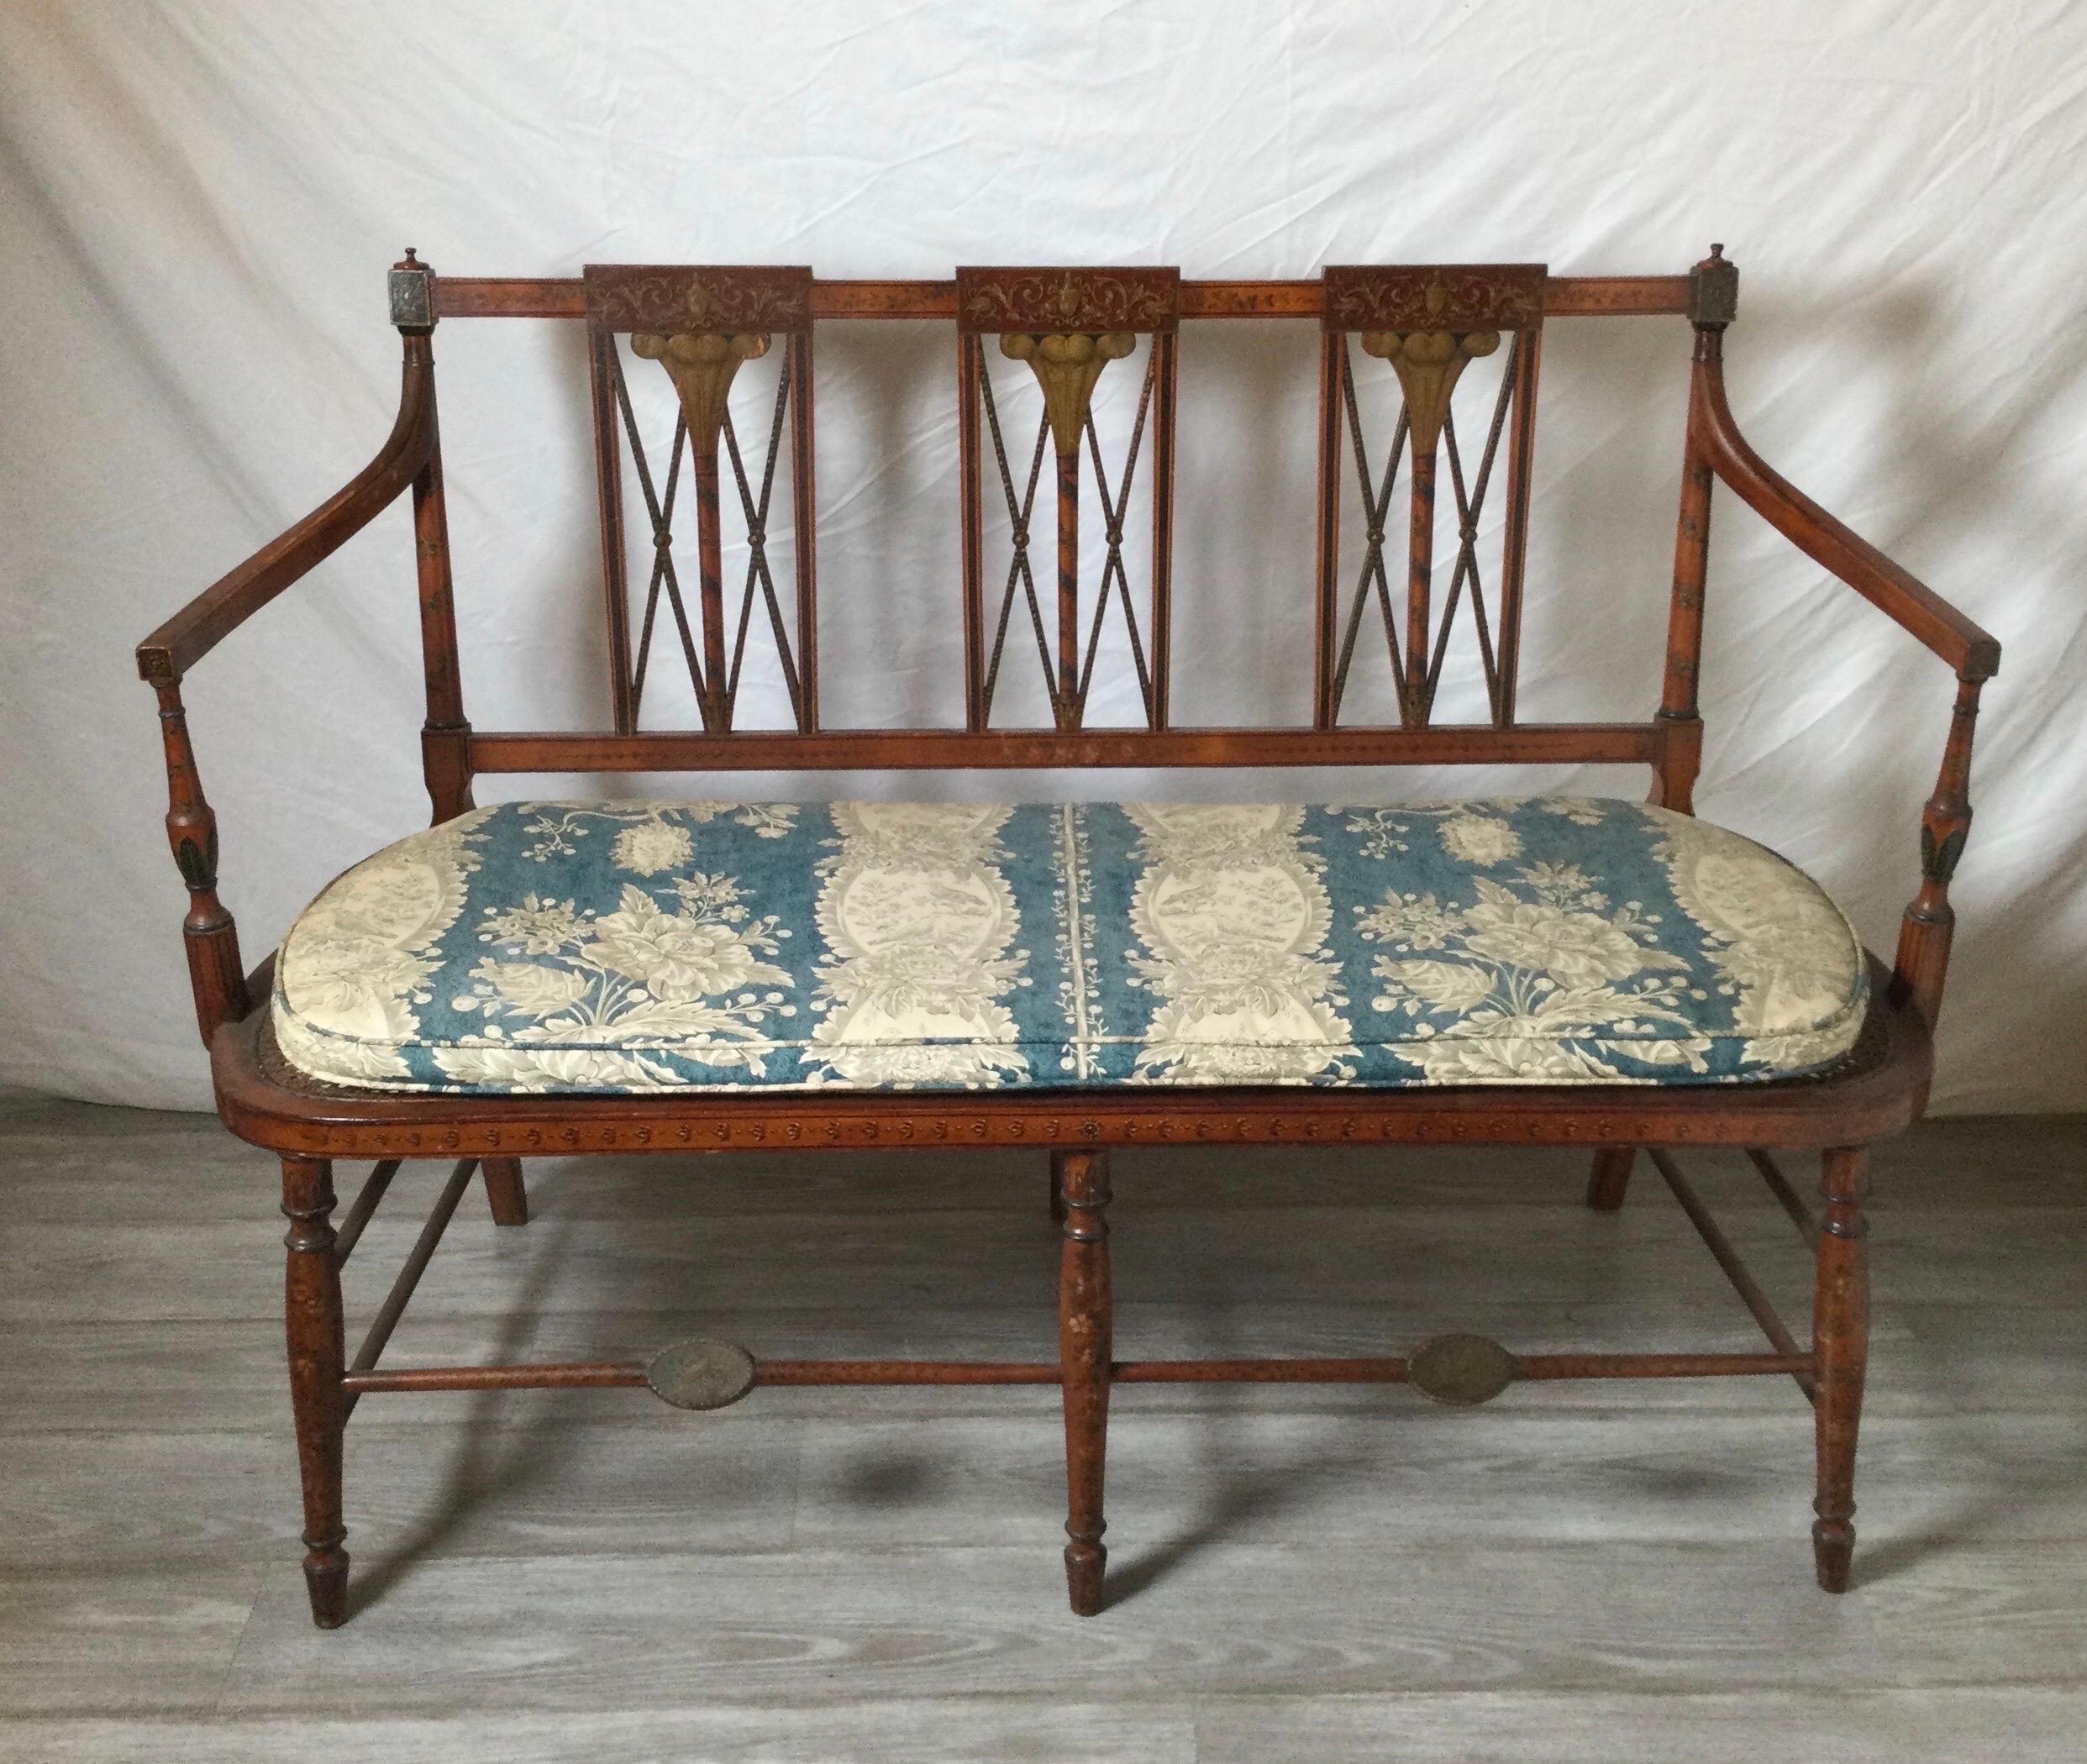 A rare Sheraton high style fancy painted settee. In the manner of Thomas Renshaw with intricate paint decoration with Tabaco leaf motif with a cane seat with damask cushion. Possibly the Virginia market. This is a Sothern folk art example.